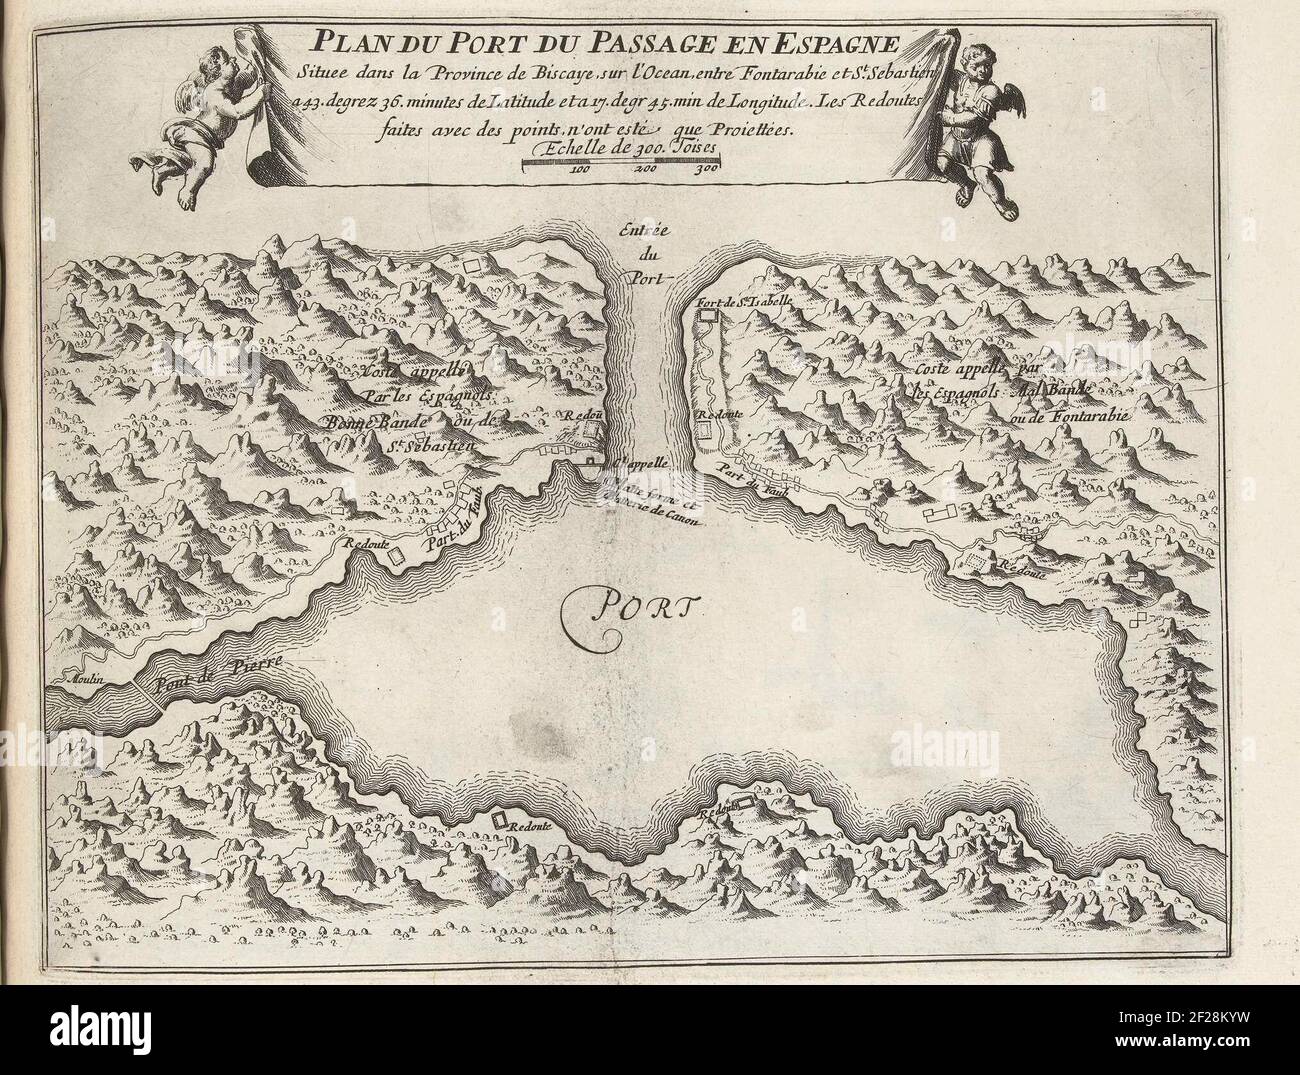 Kaart van of Naturlijke Haven Van Puerto de Pasajes, ca. 1693-1696; Plan of the port of the passage in Spain (...); The forces of Europe, or description of the main cities, with their fortifications: designed by the best ingenieurs, particularly those (...) of France, whose plans have been lifted by M. de Vauban.map of the Natural Harbor of Puerto de Pasajes to the Spanish North Coast at San Sebastian, ca. 1693-1696. Part of the Sixth Part (1696) of the Picture in Which Bundles Are The Eight Parts of the Forces of Europe Issued Between 1693-1697. The Printing Works Consistencuts of 175 Flat Pl Stock Photo